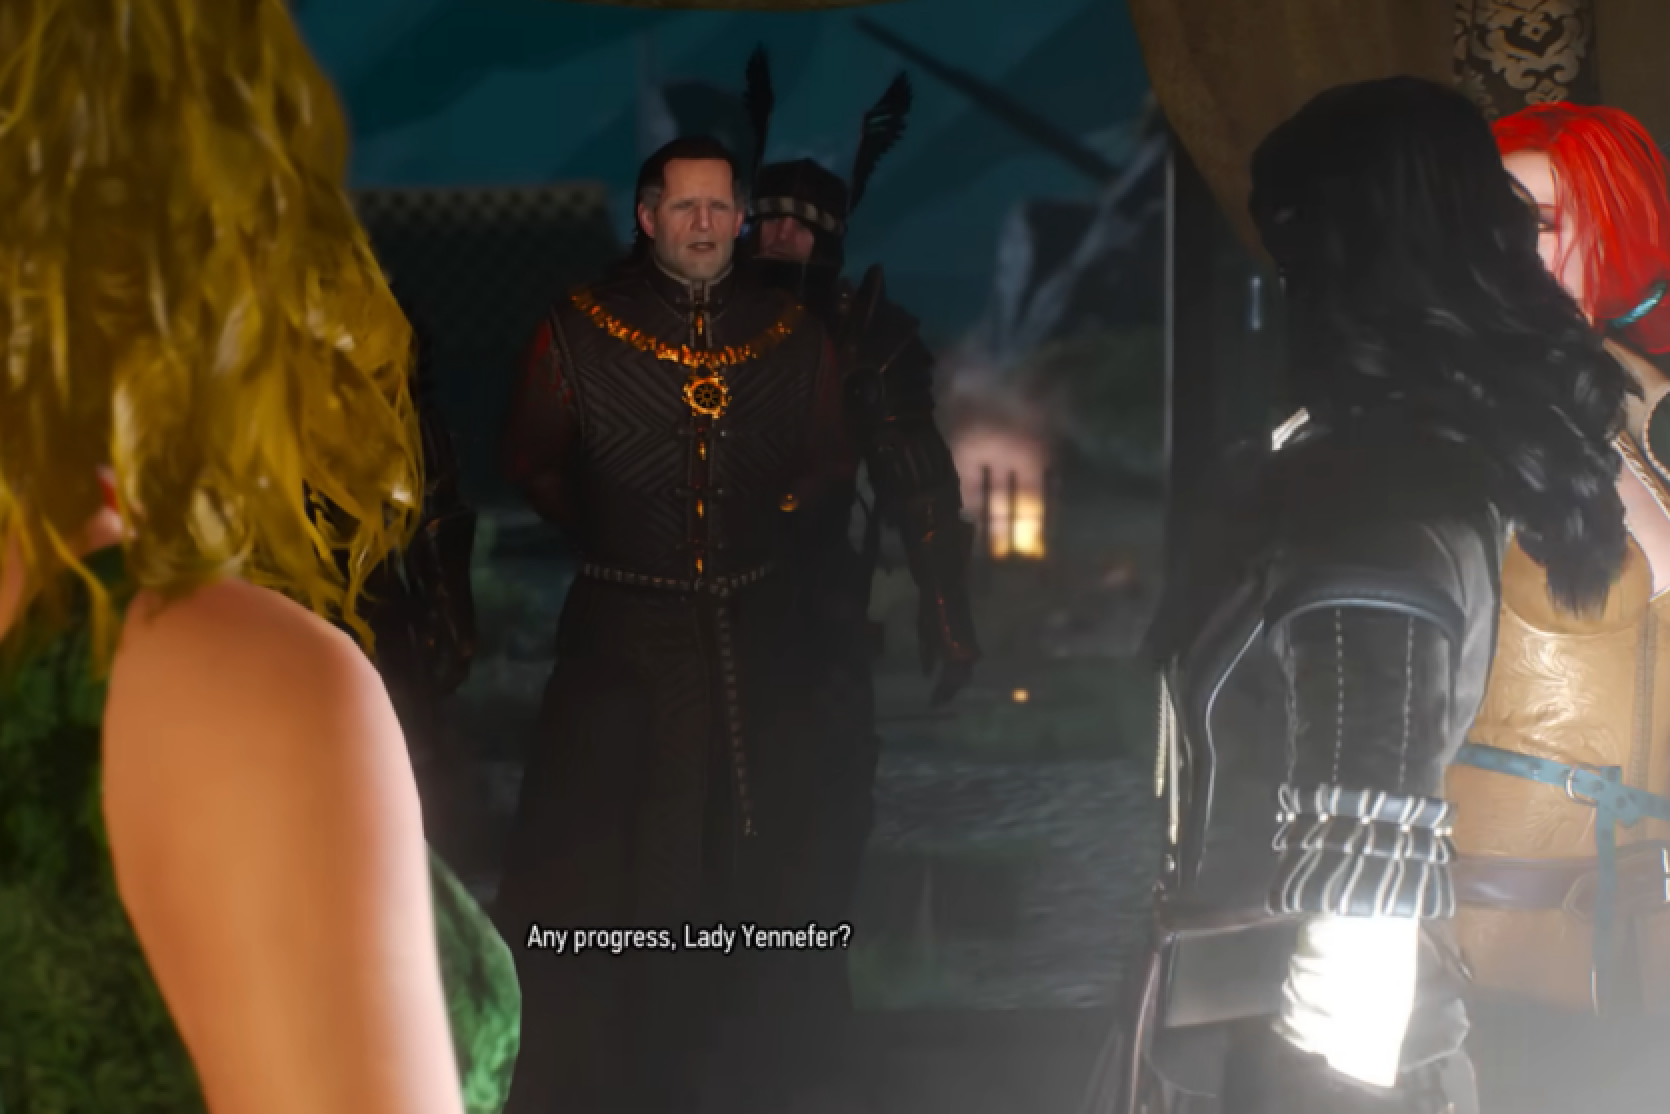 Mods found The Witcher 3's cut finale thanks to REDkit - Jennyfer betrays the warlocks